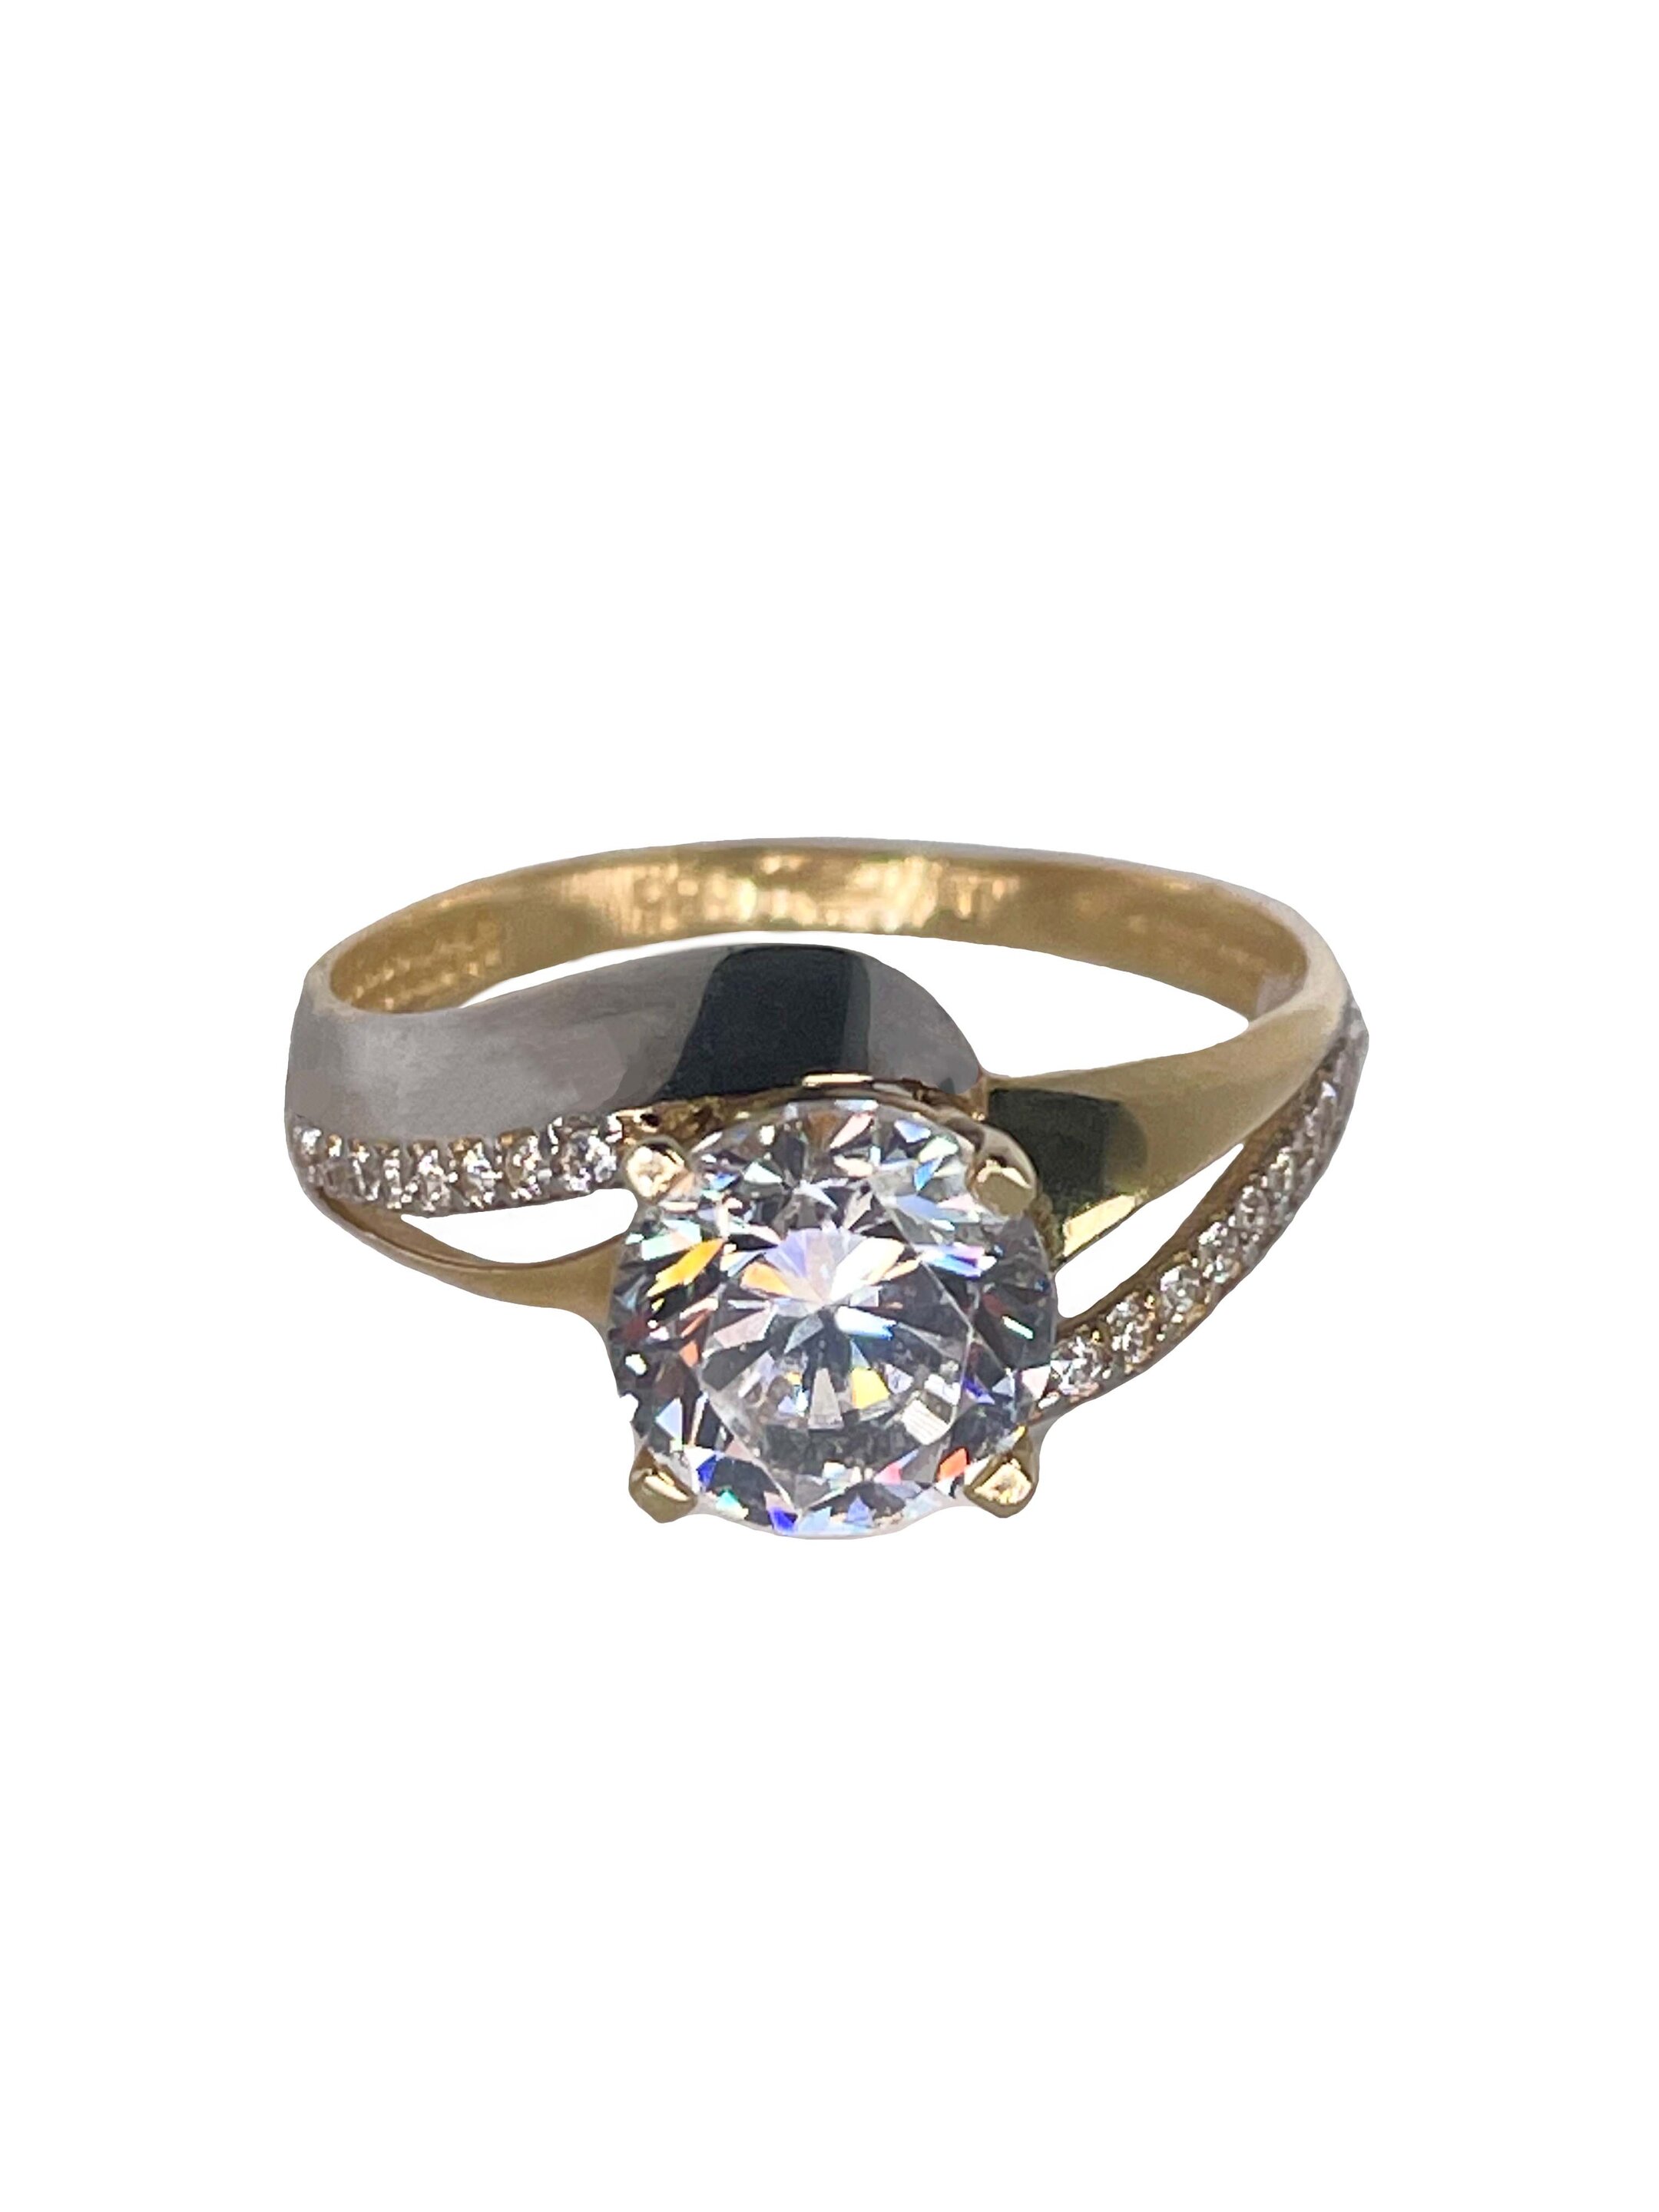 Two-tone gold women's ring with zircons